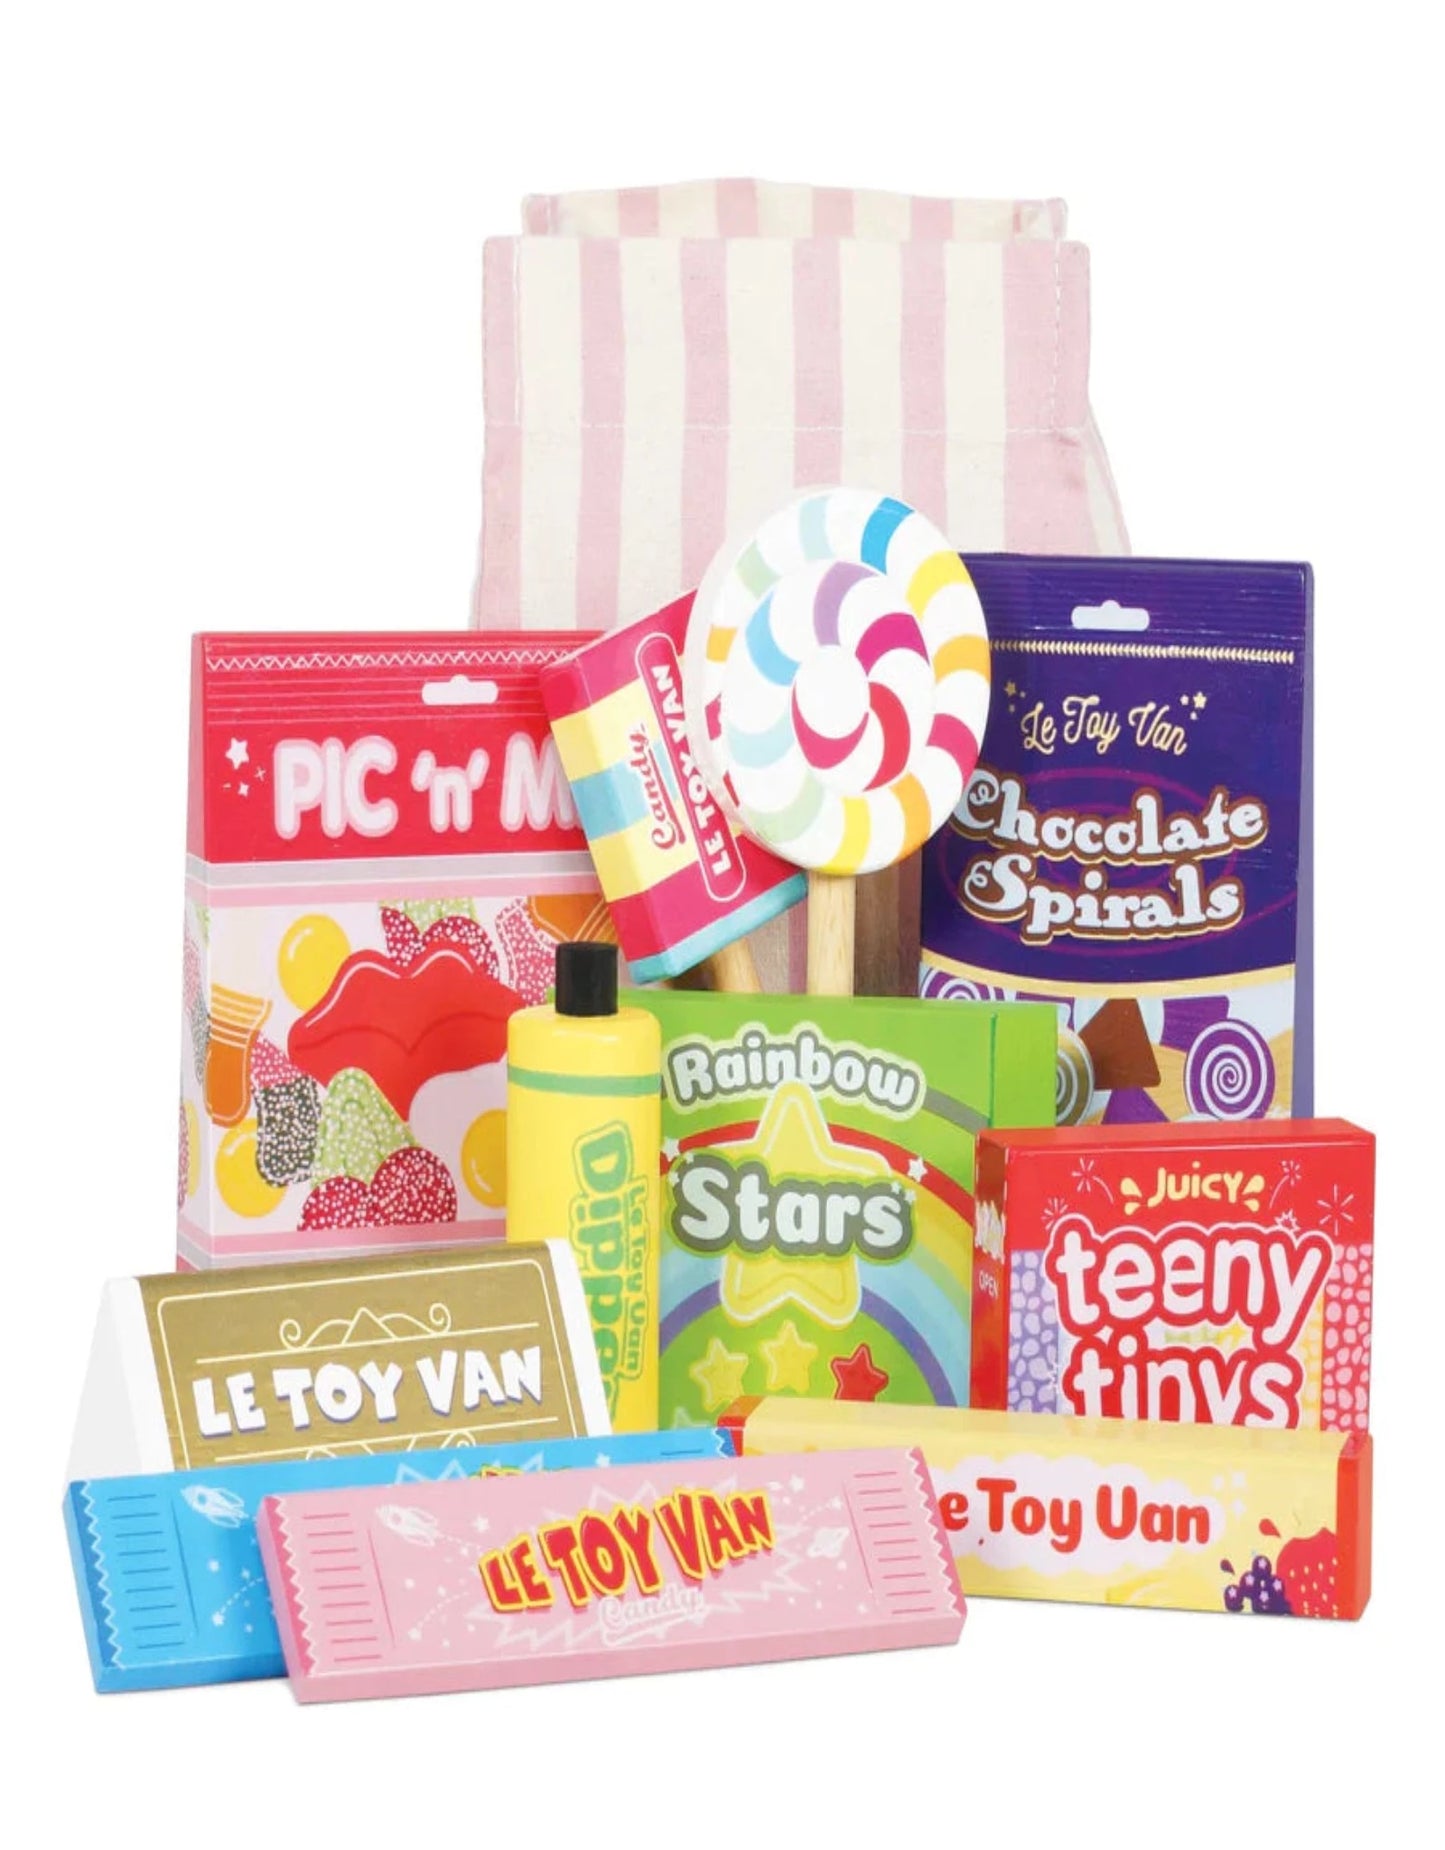 SWEETS & CANDY SET - LE TOY VAN